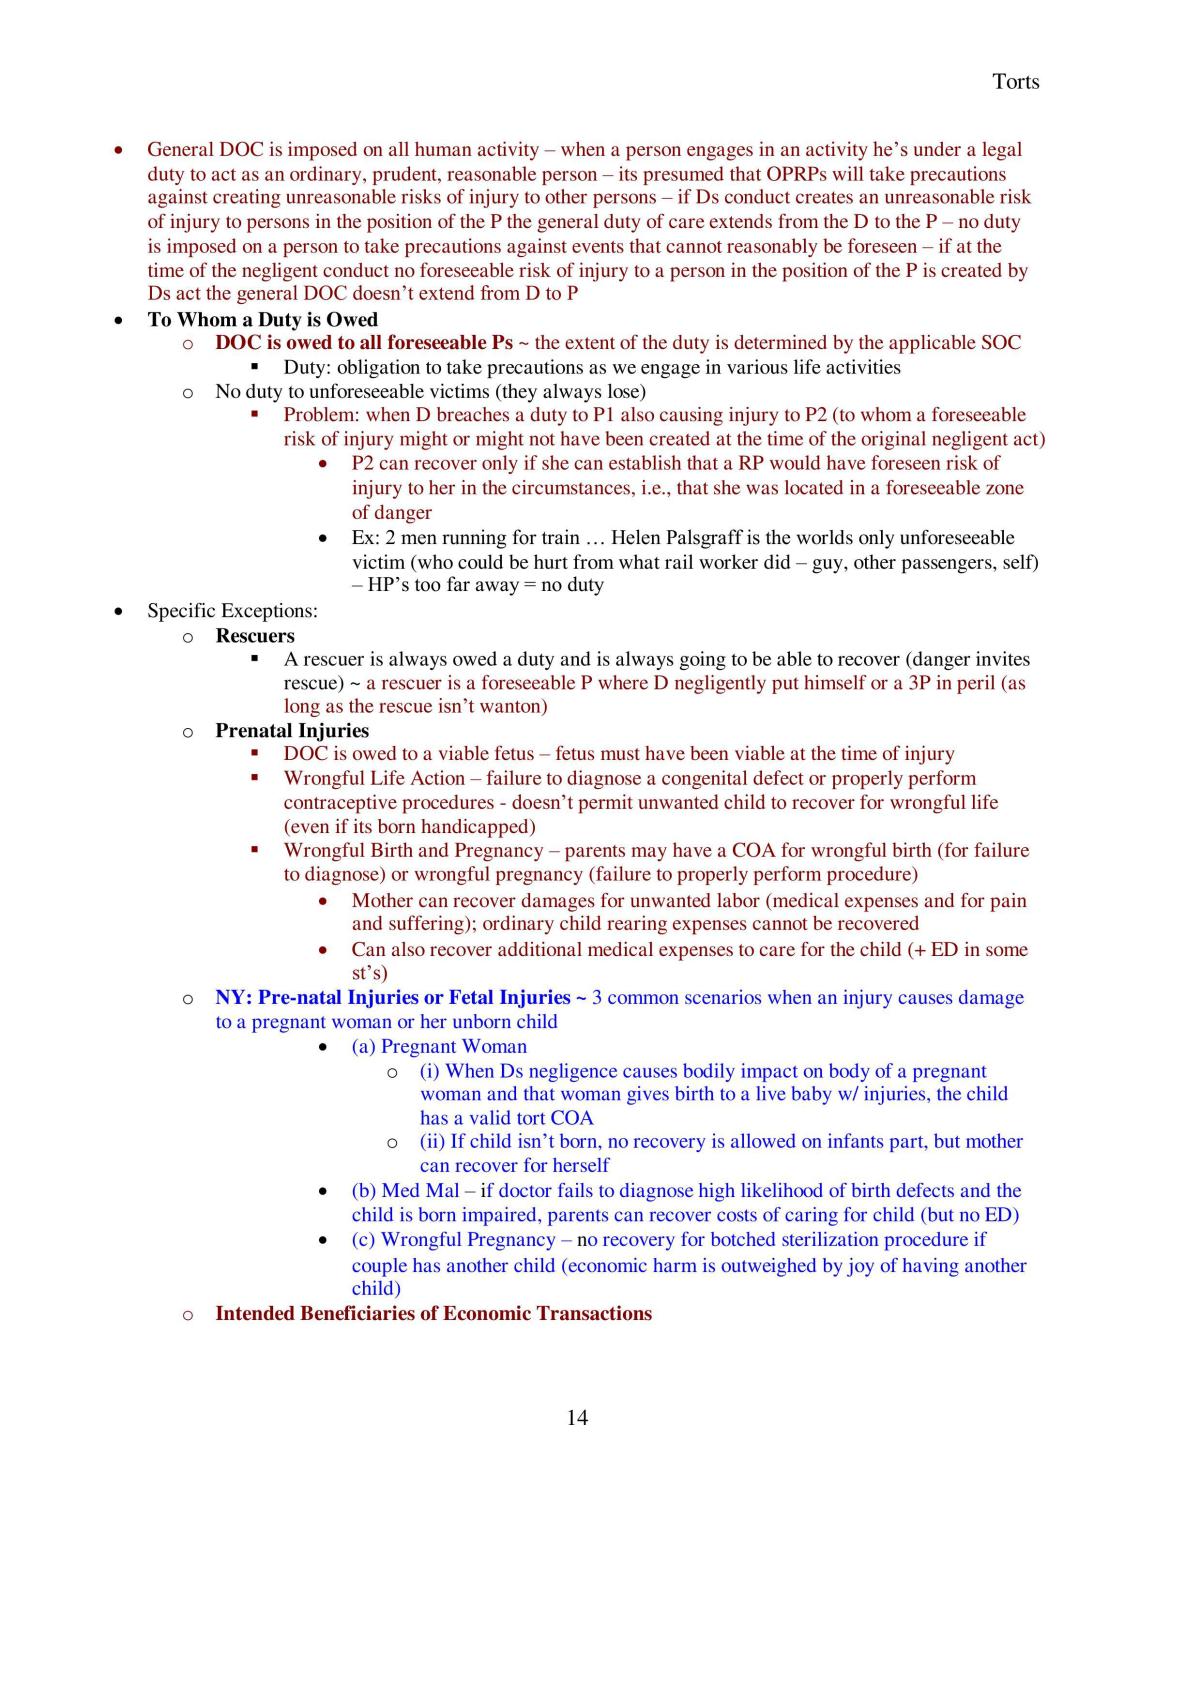 Torts Notes - Page 14